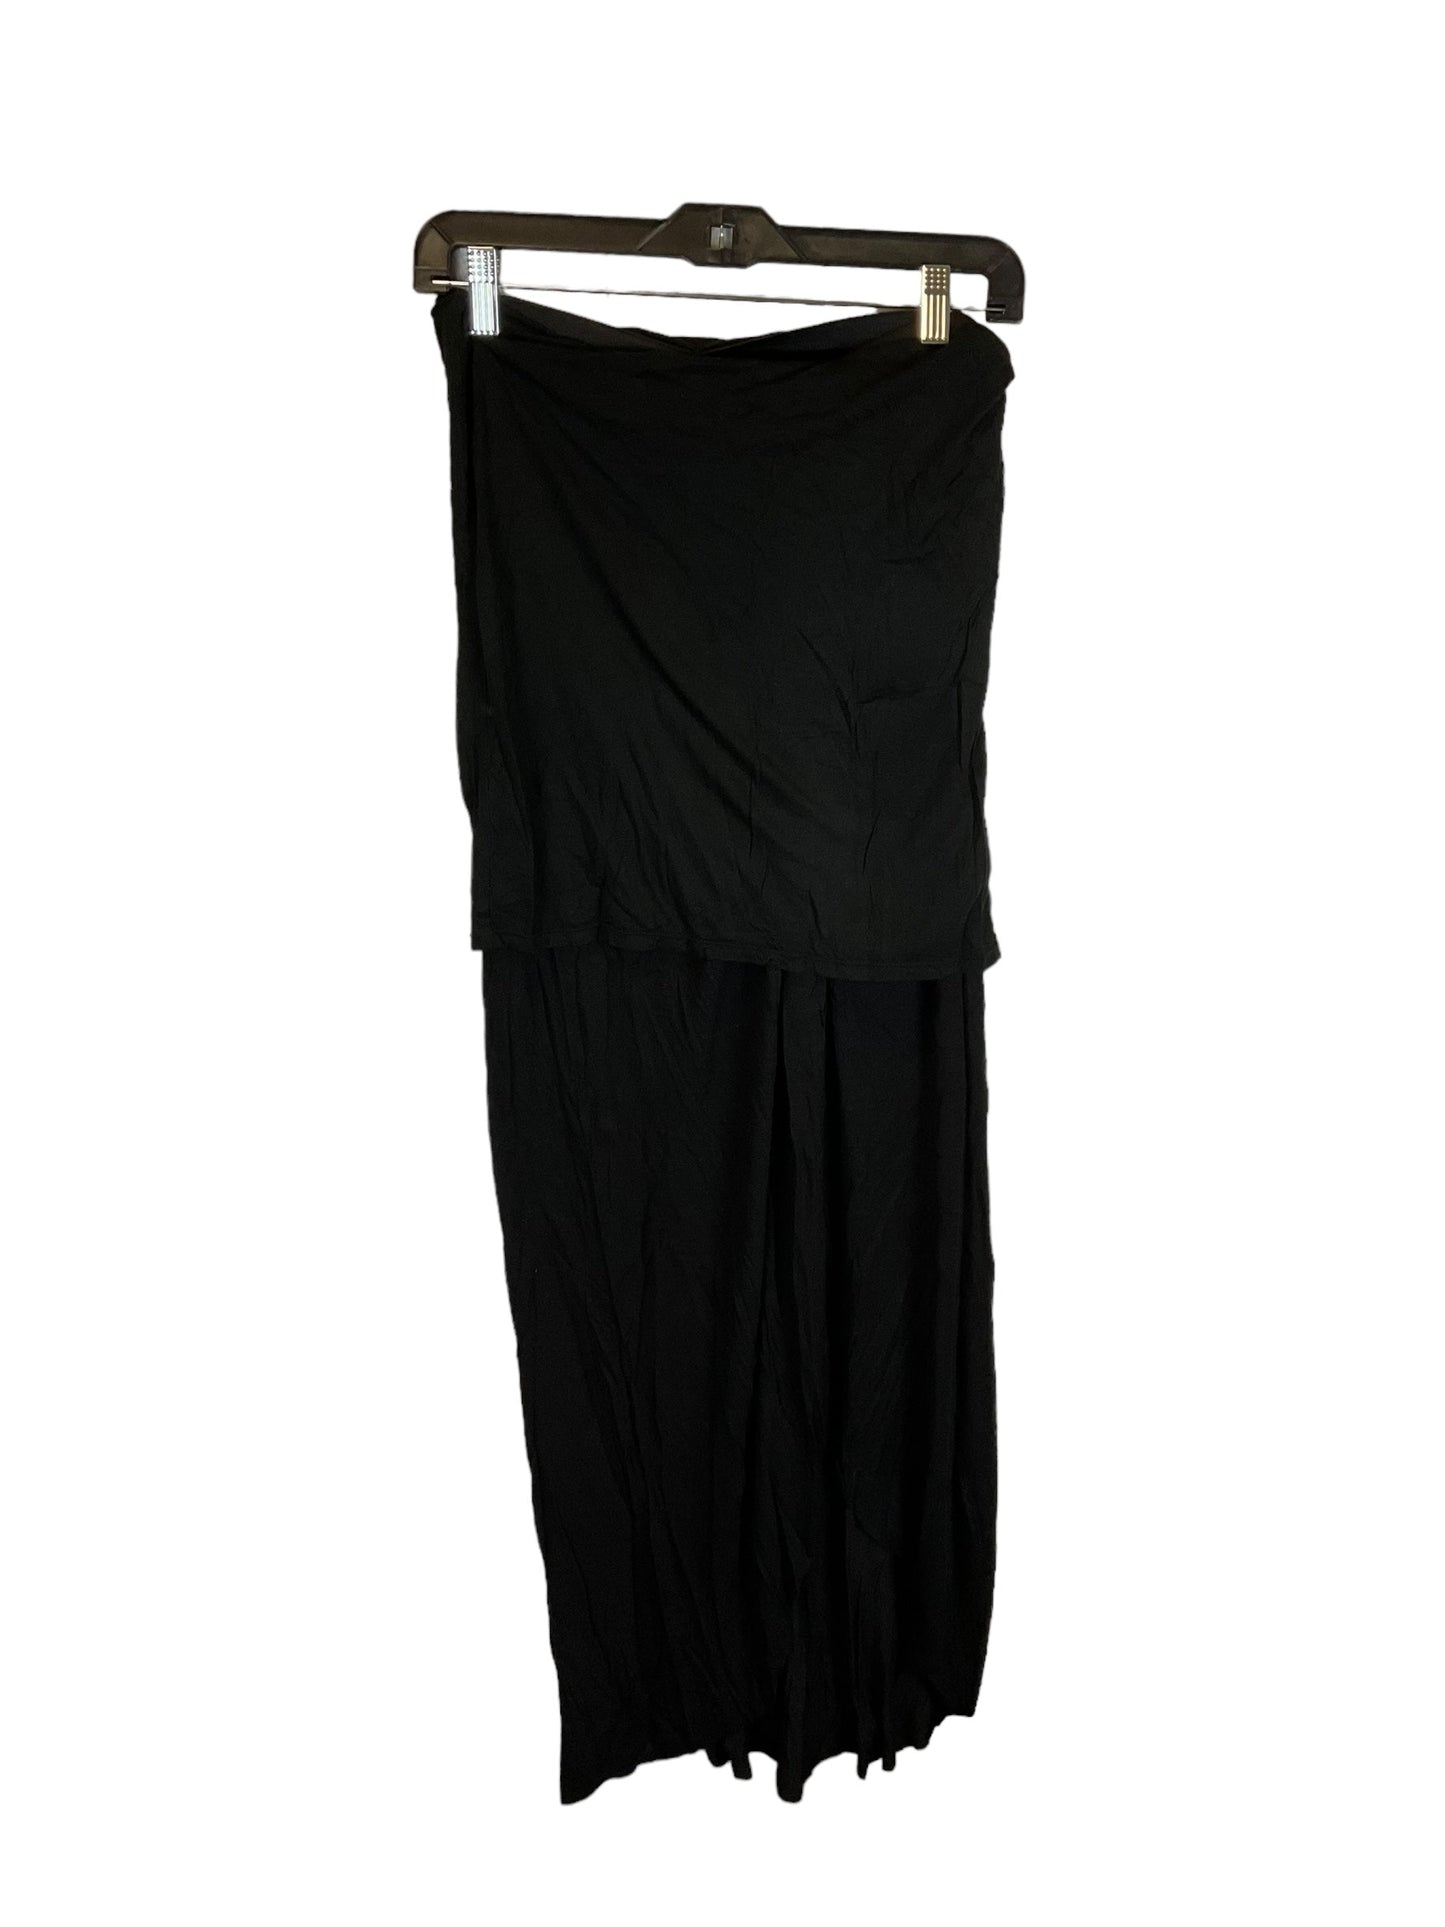 Black Dress Casual Maxi Free People, Size S